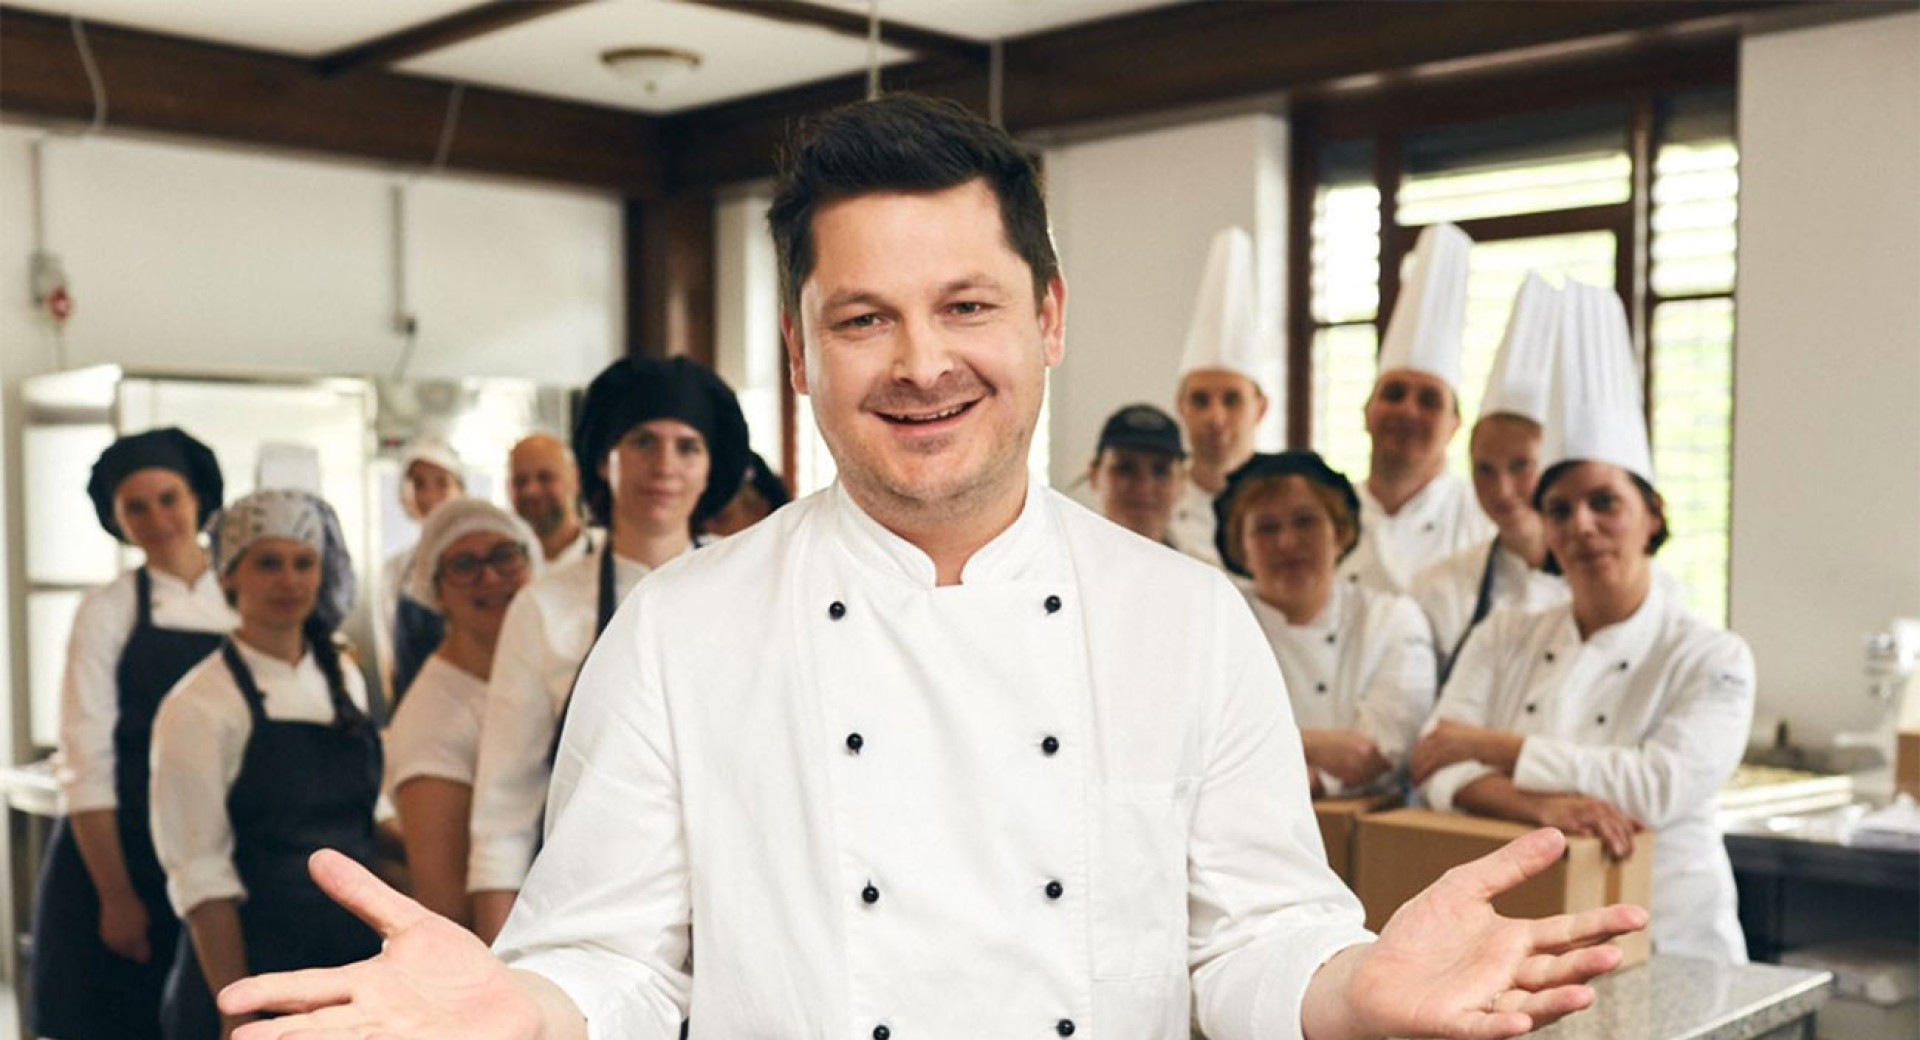 A man in a white chef's uniform, his team in the background with their arms spread wide.